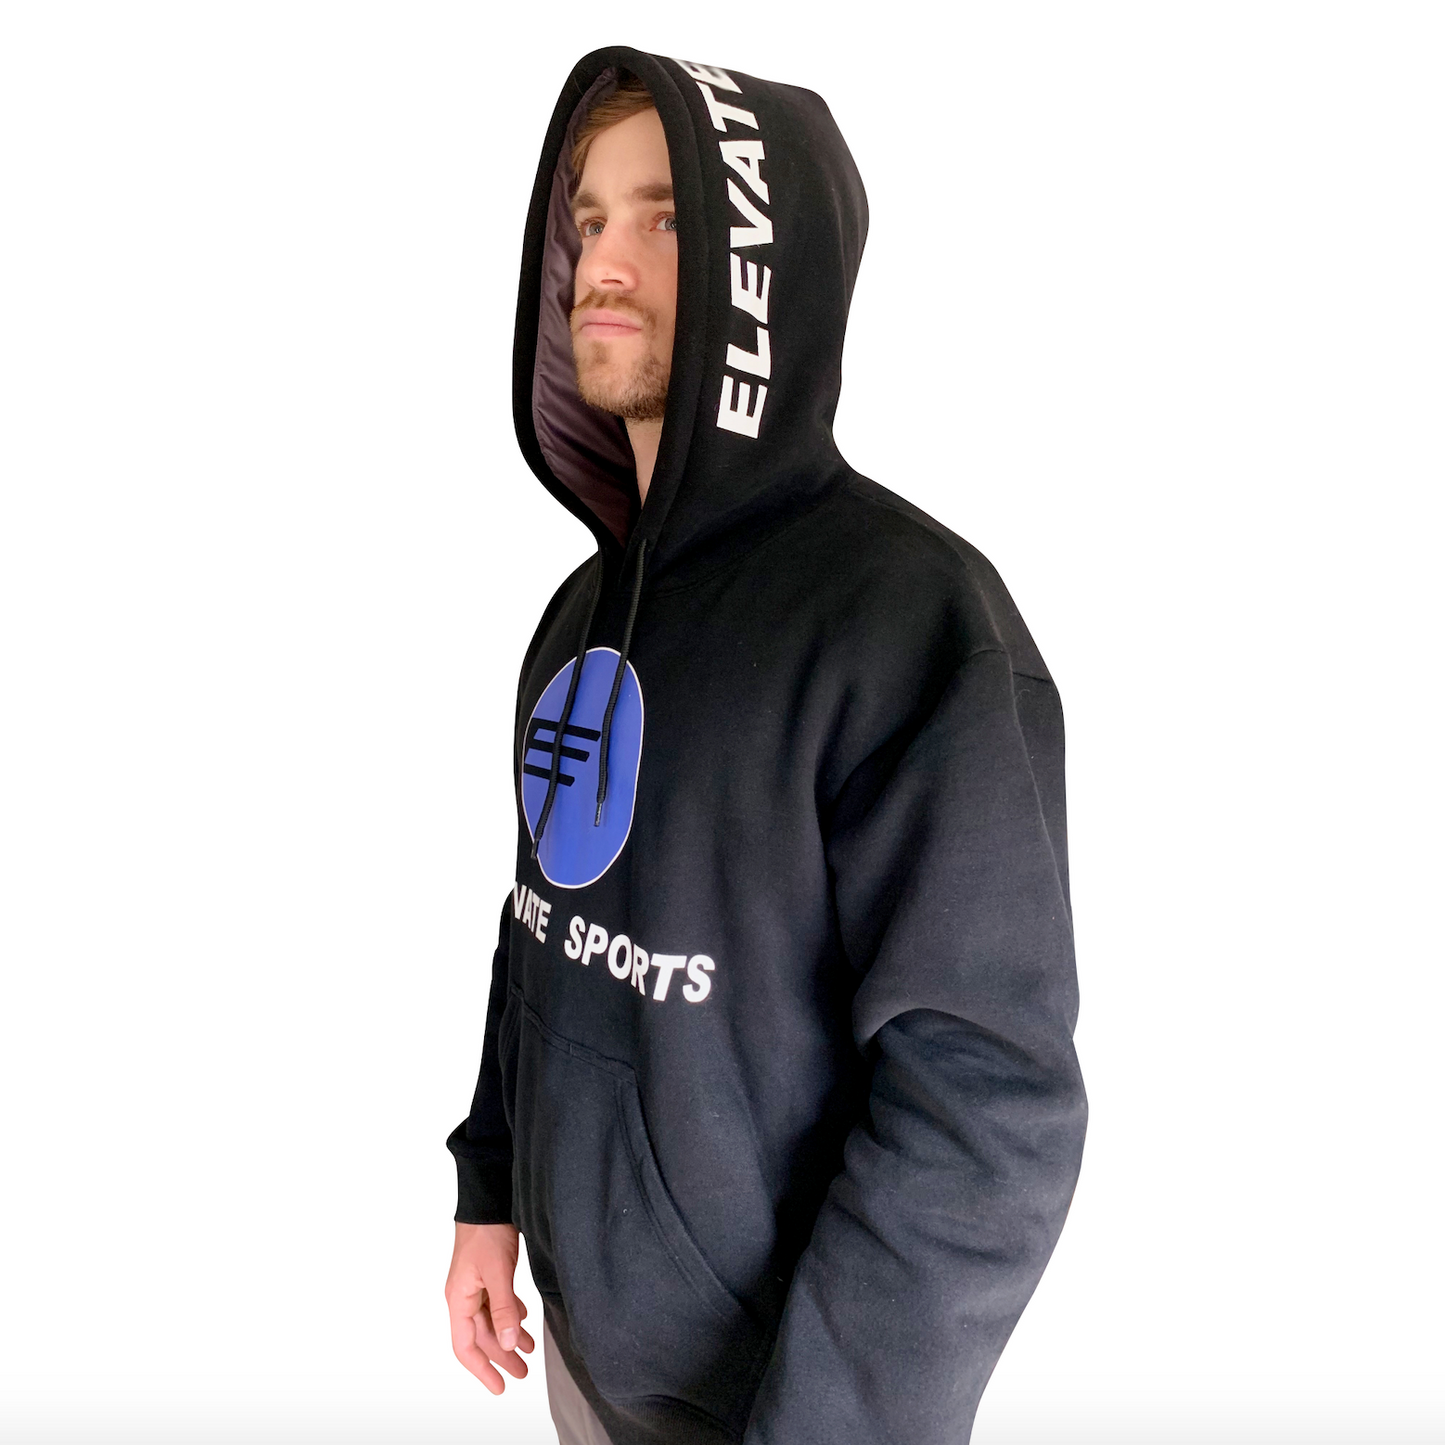 Hoodie Sweatshirt perfect for hanging out or playing sports